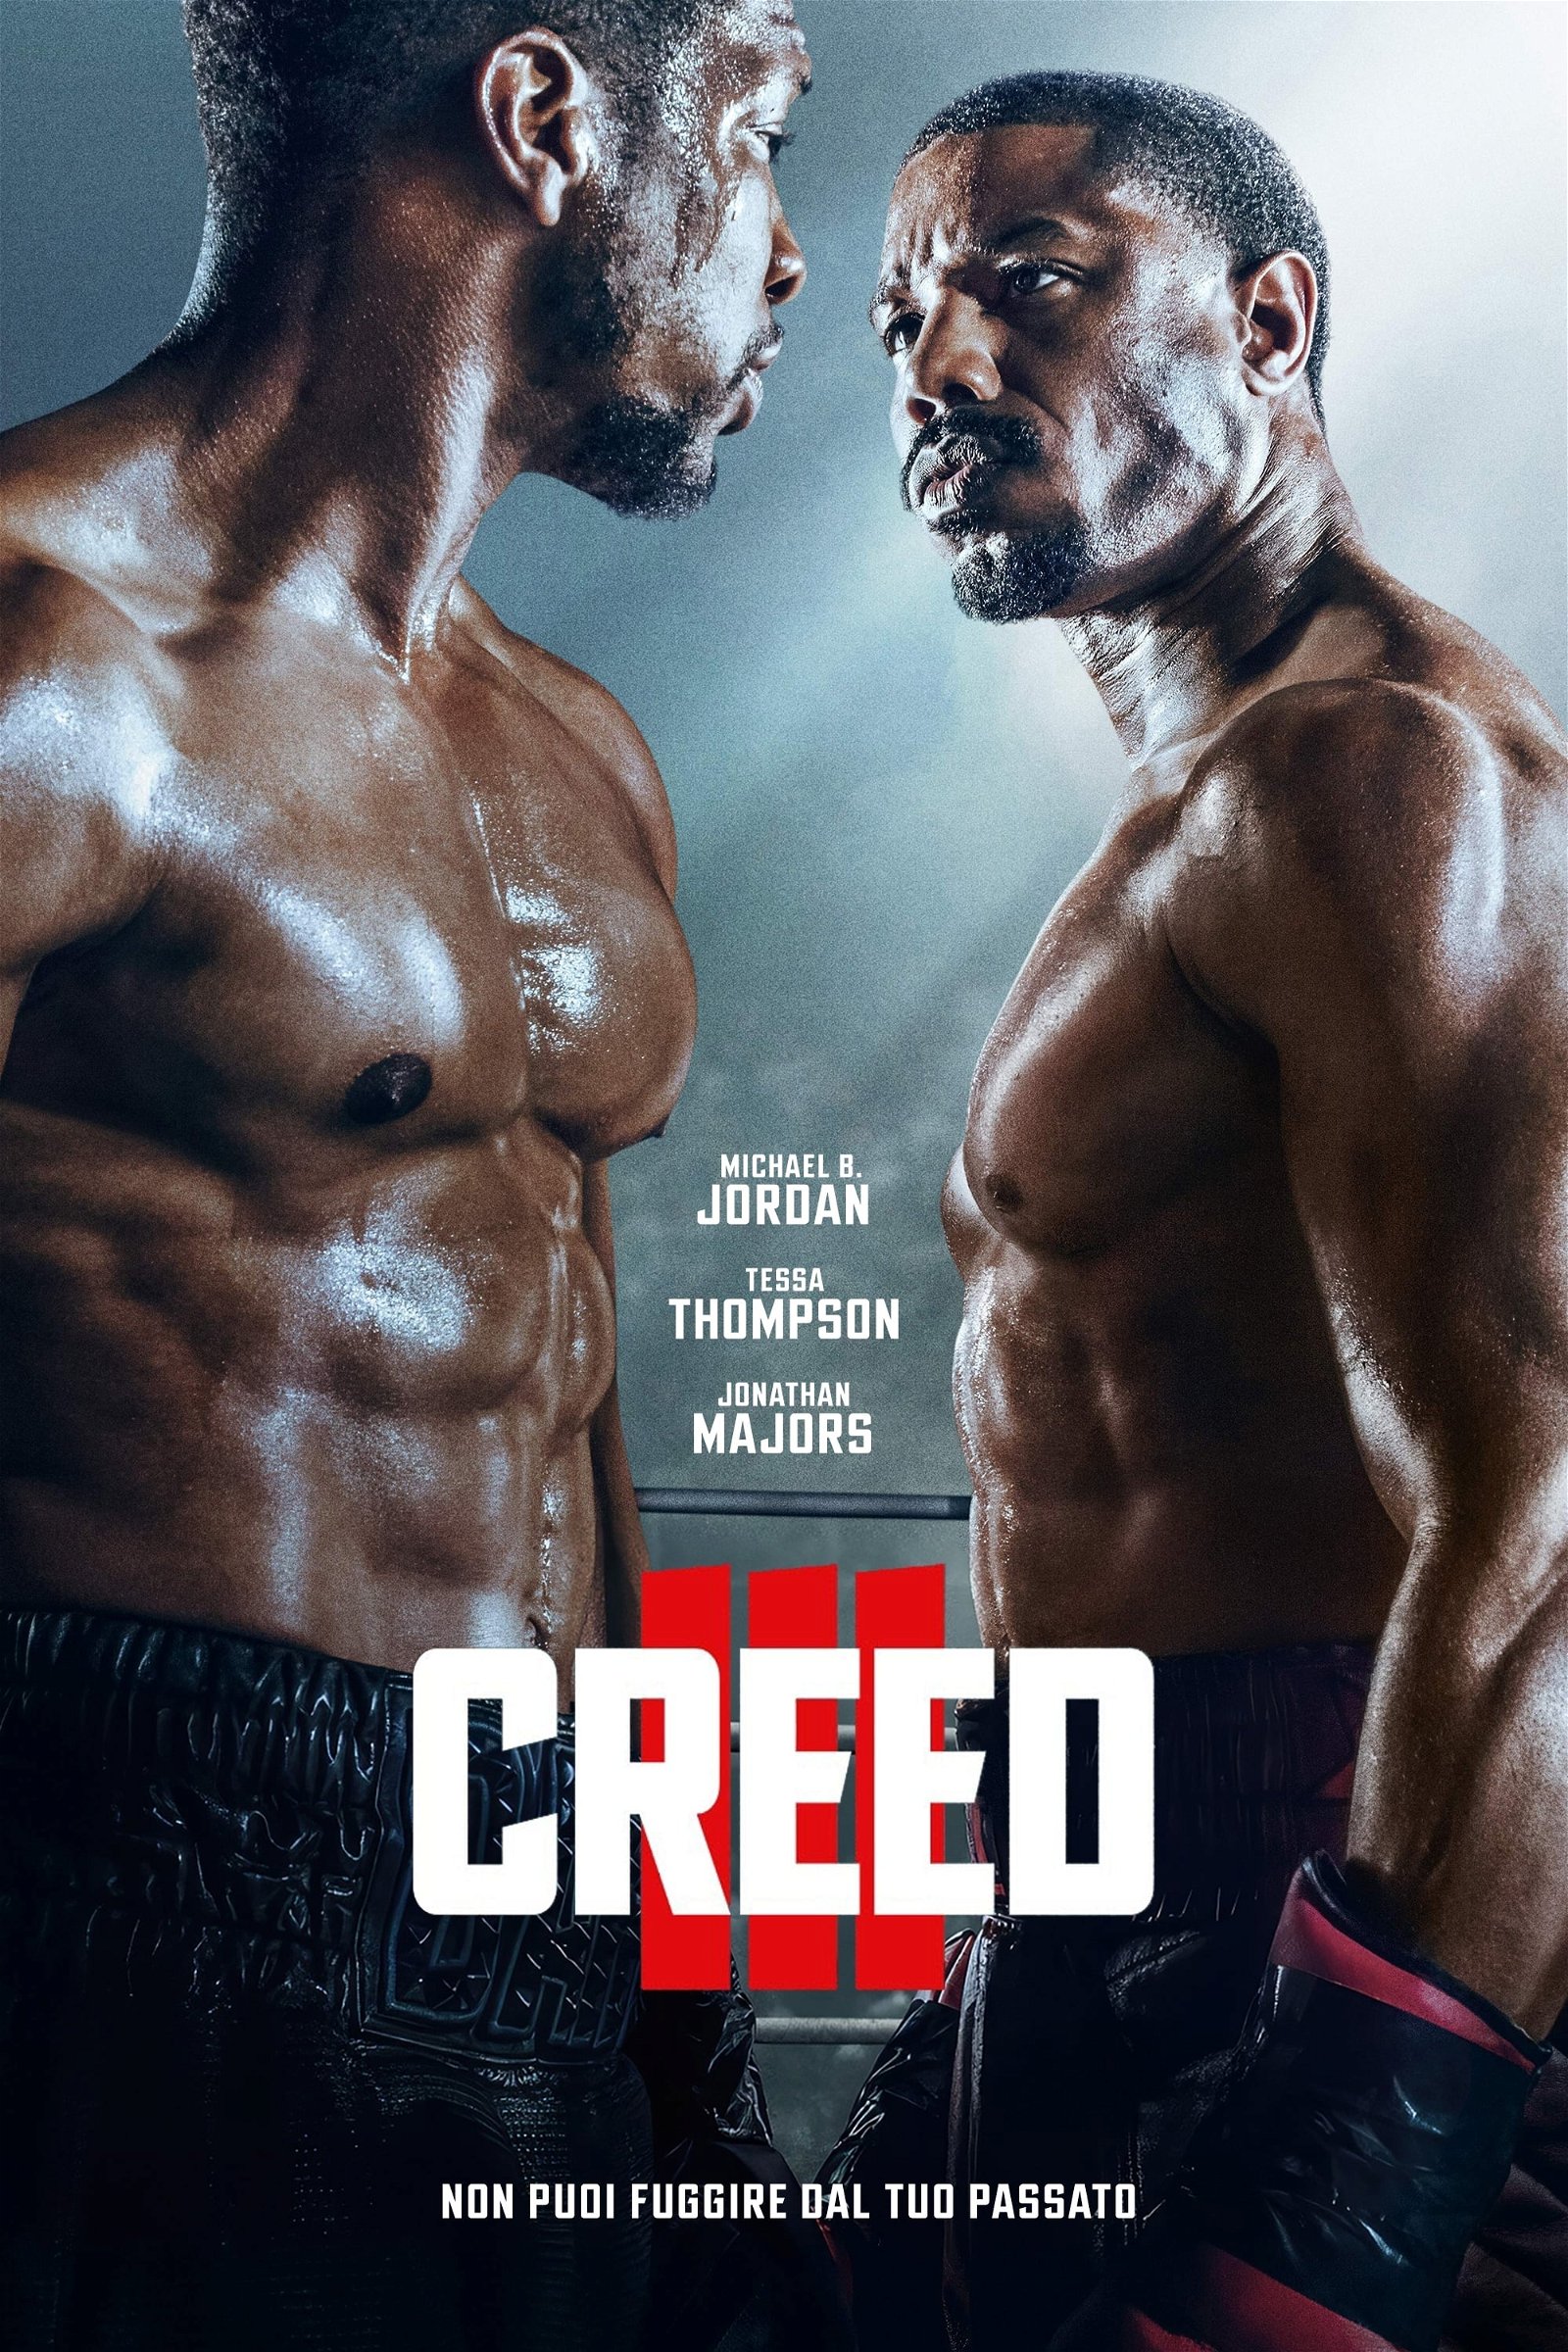 creed 3 christian movie review